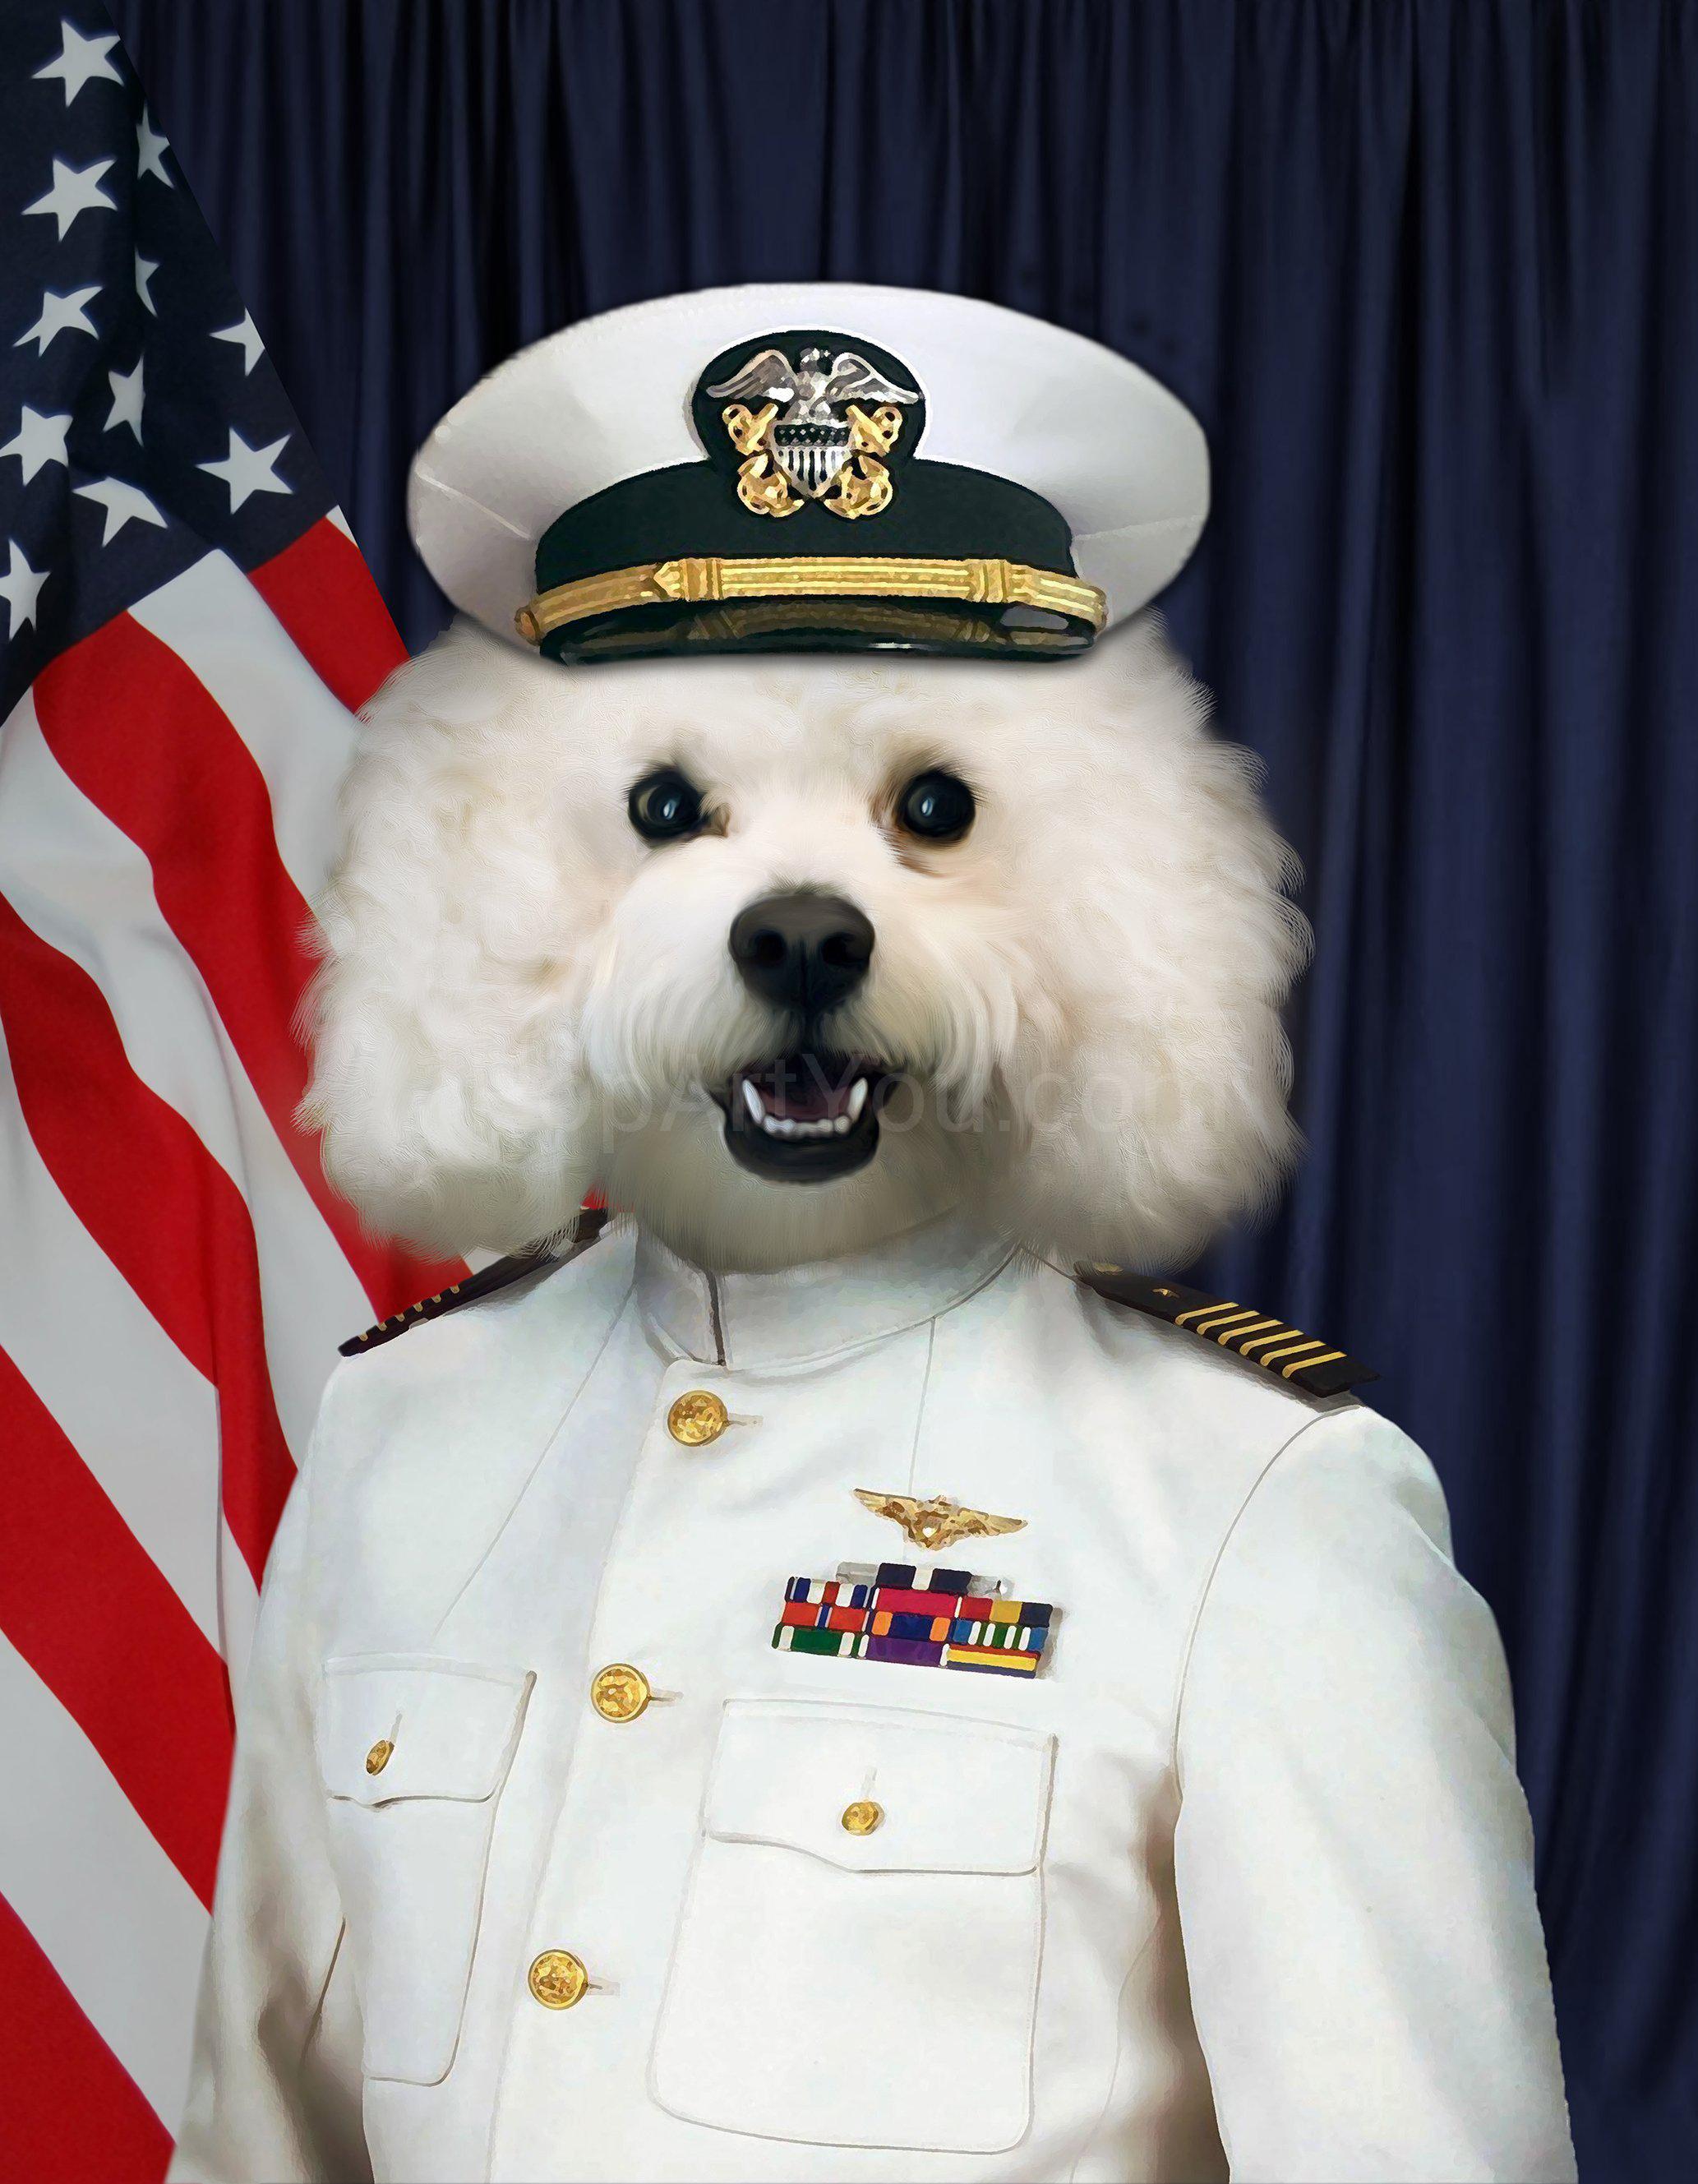 The portrait shows a dog with a human body dressed in white marine clothing with a hat standing near the American flag